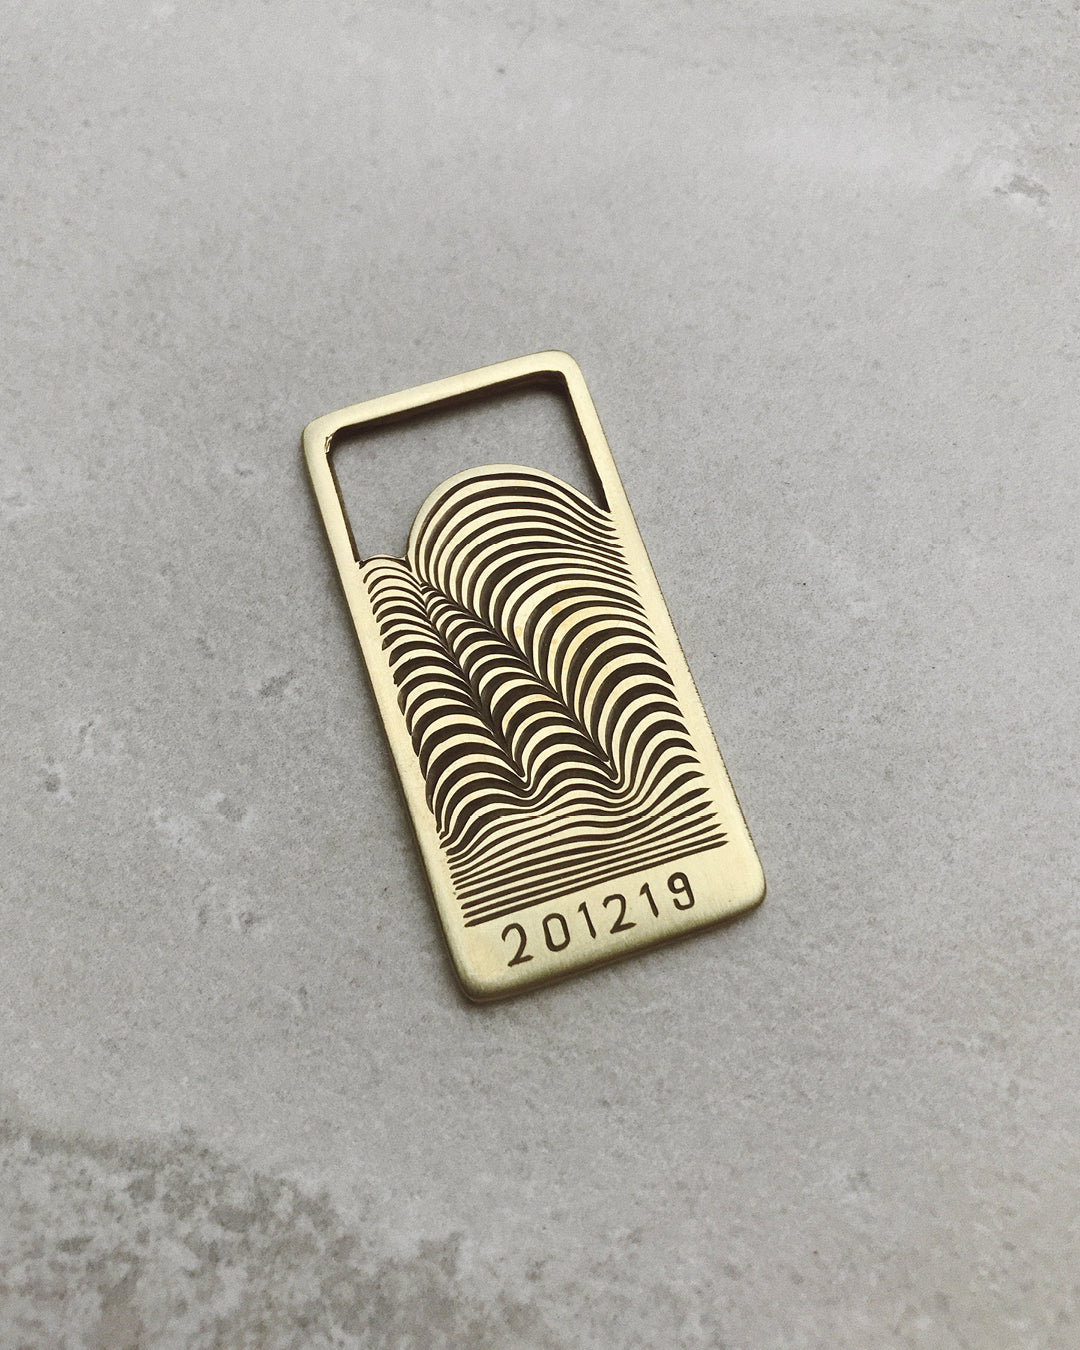 201219 - Hand Engraved Brass + cut-out